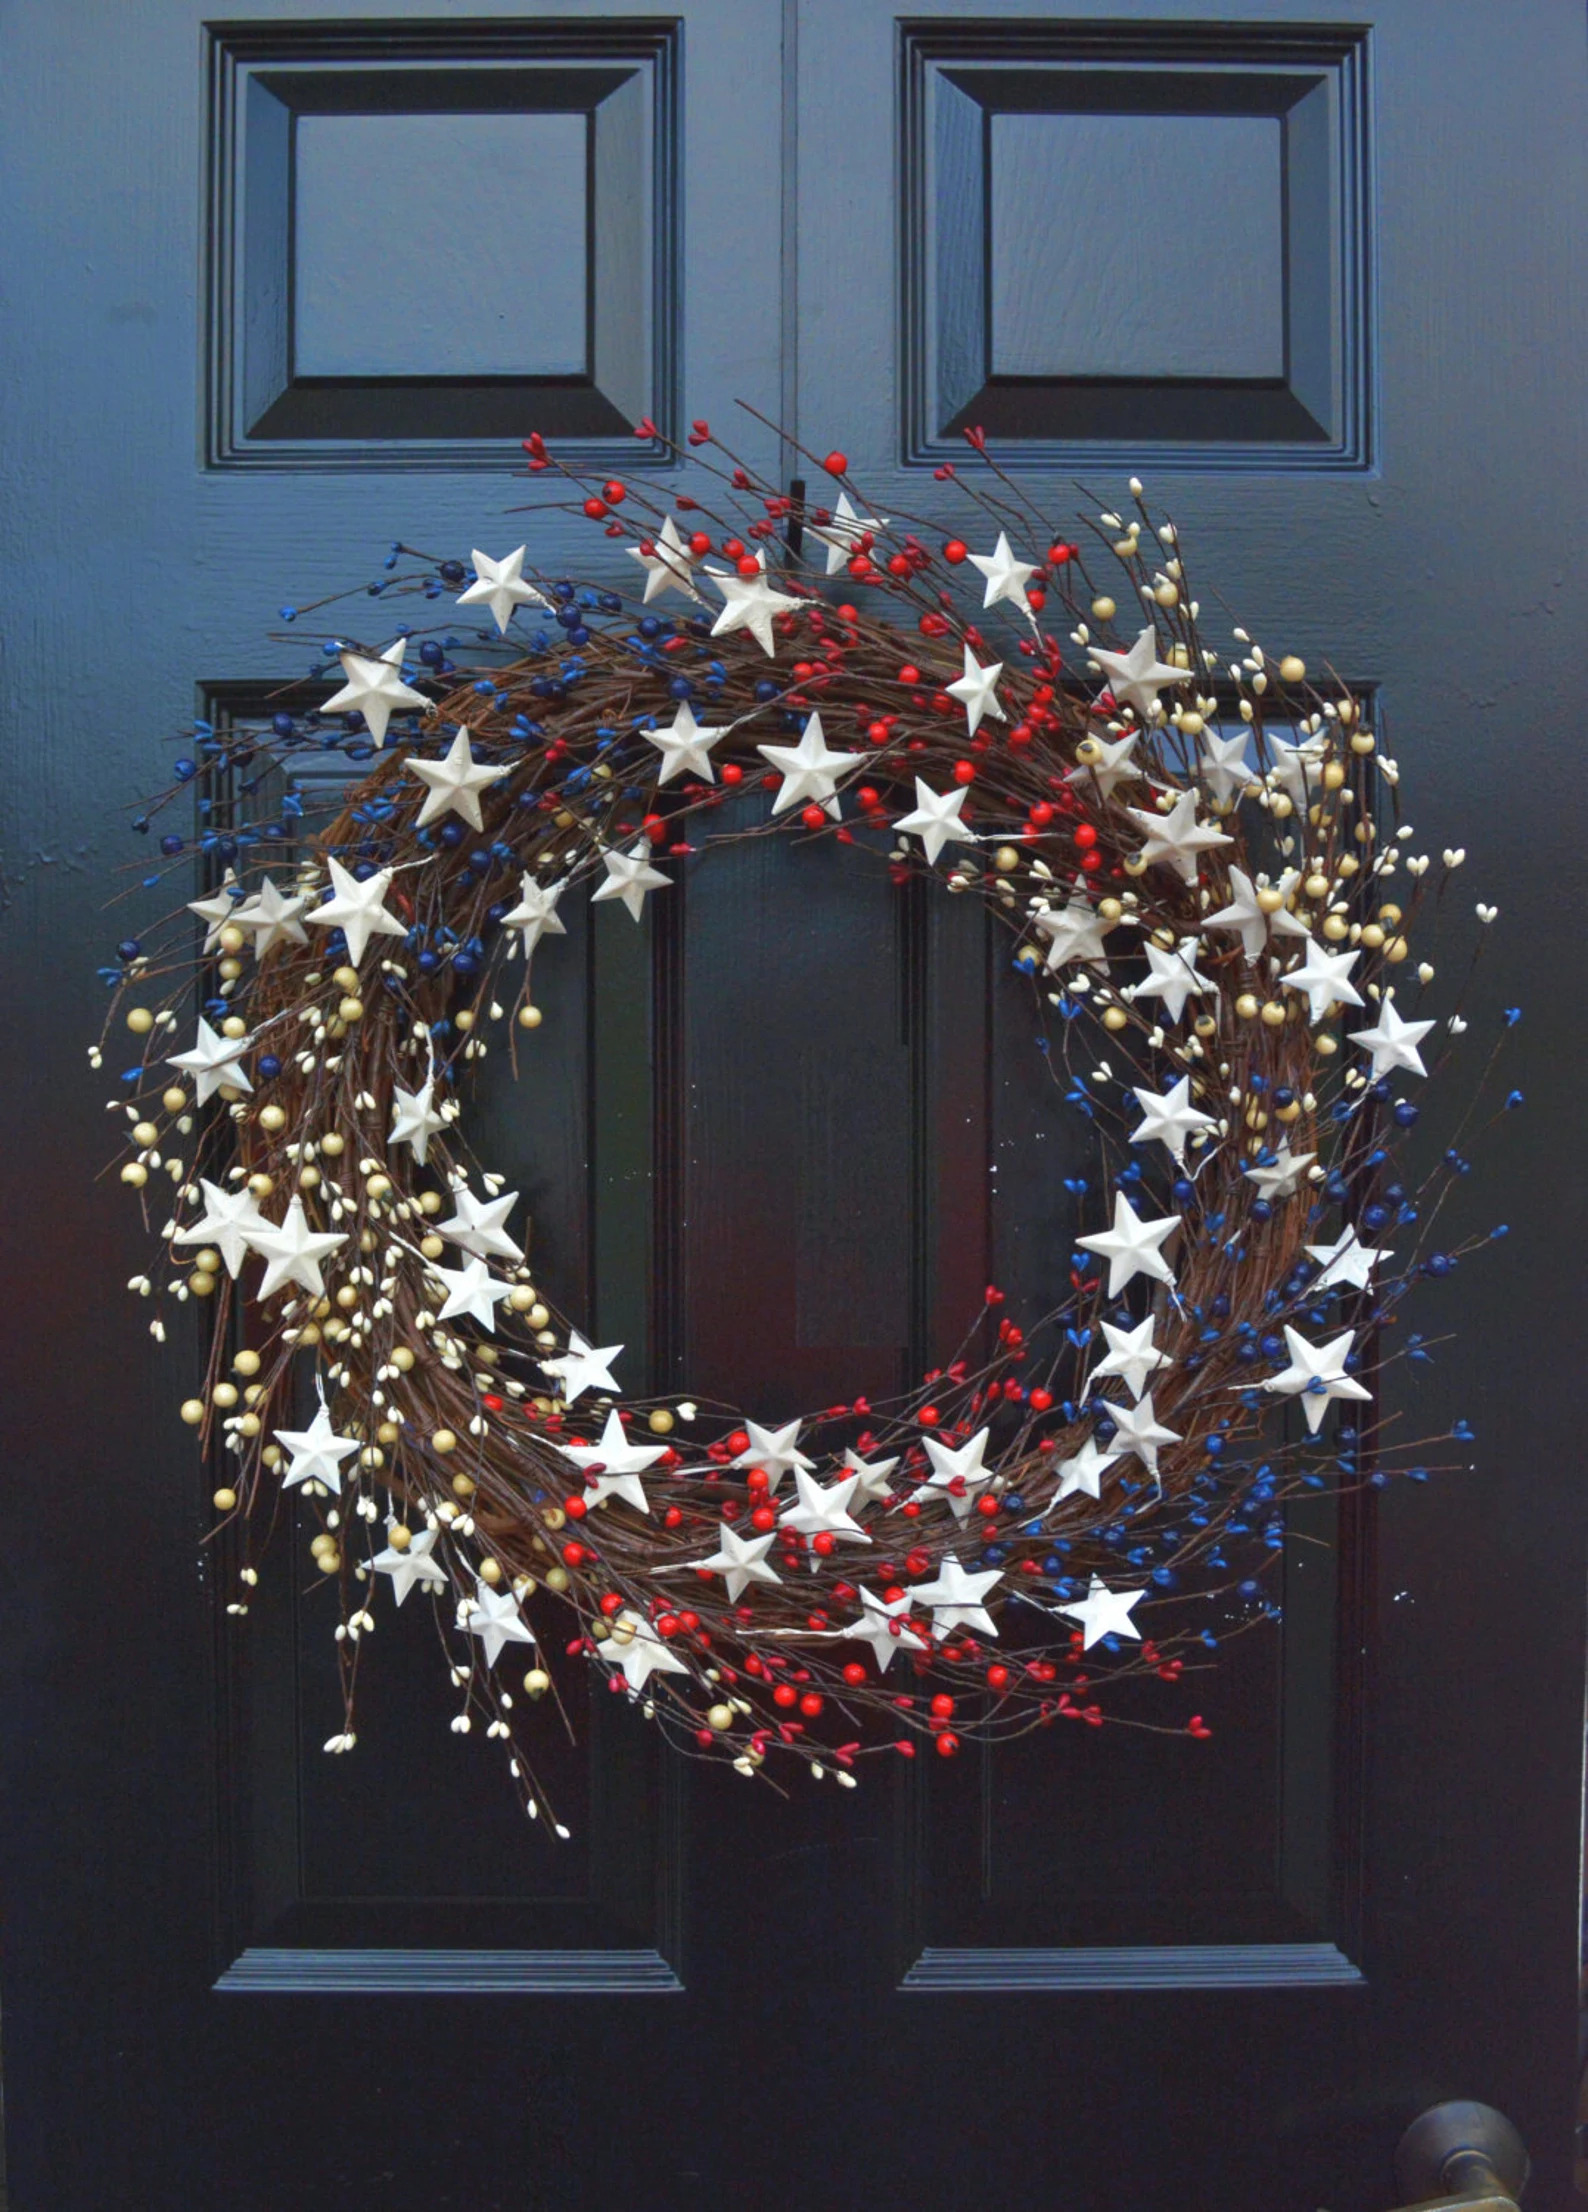 18 Beautiful 4th of July Wreath Designs That Do Make A Statement